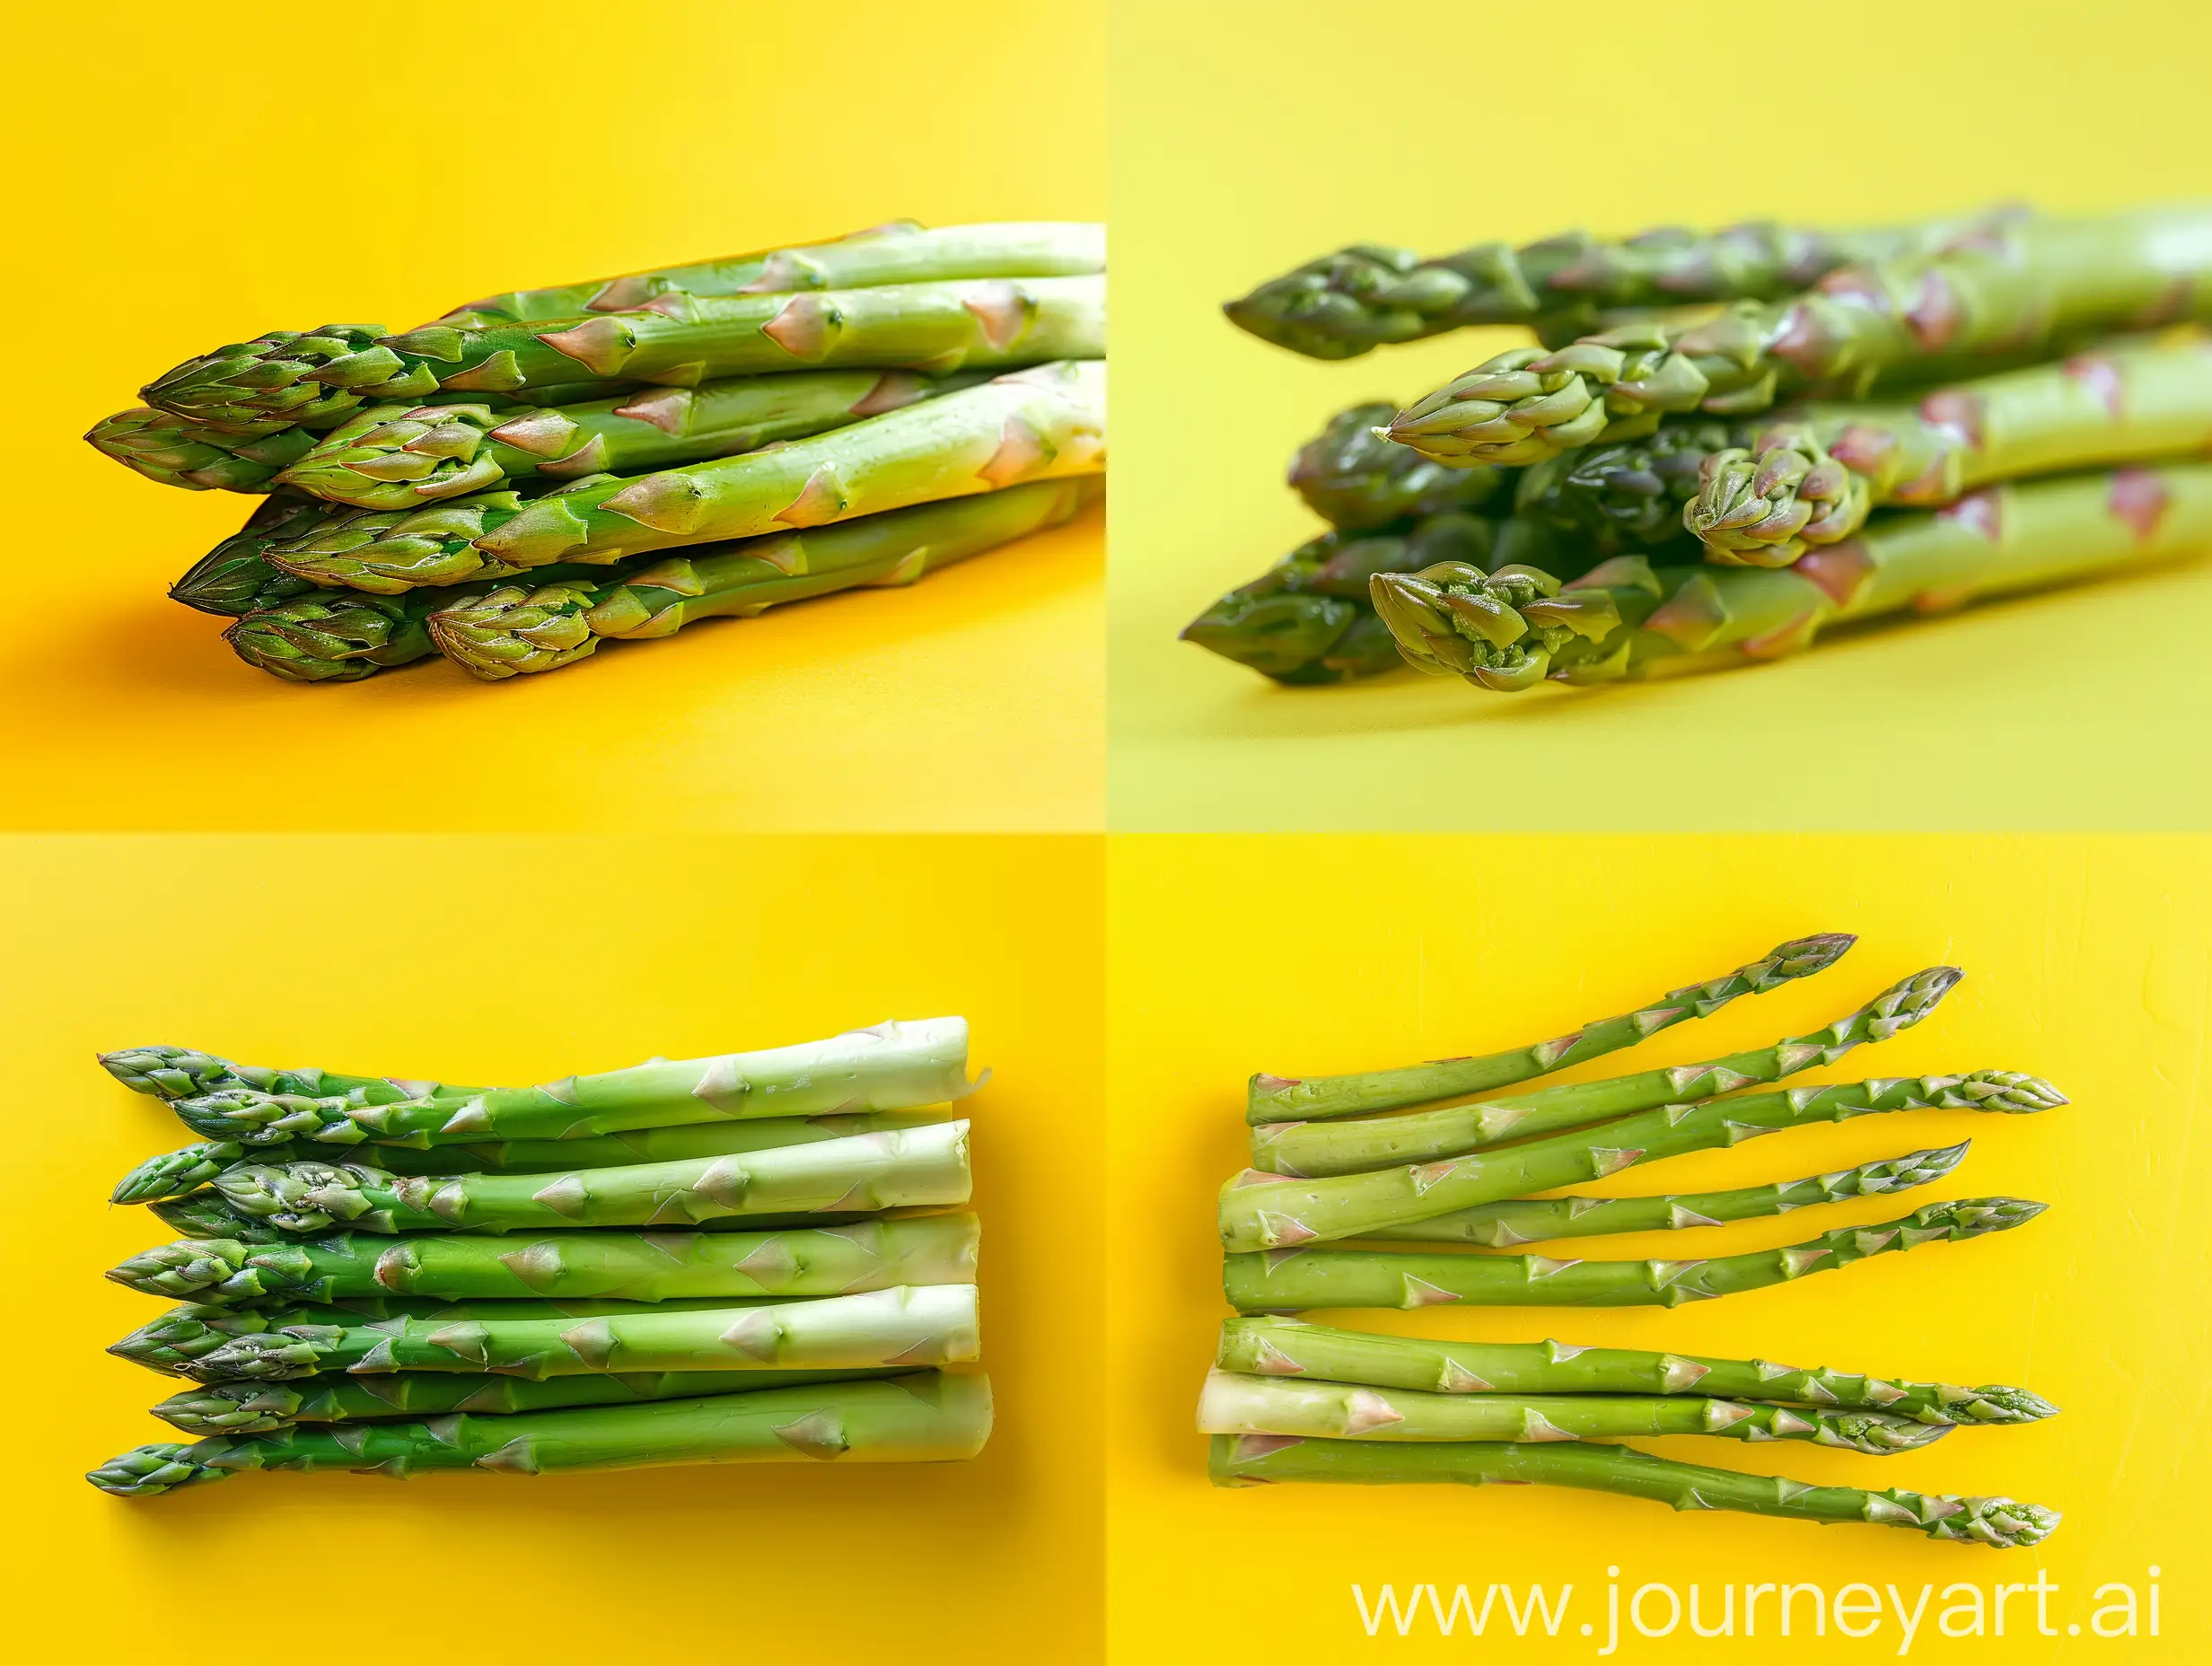 Vibrant-Asparagus-Display-on-Bright-Yellow-Background